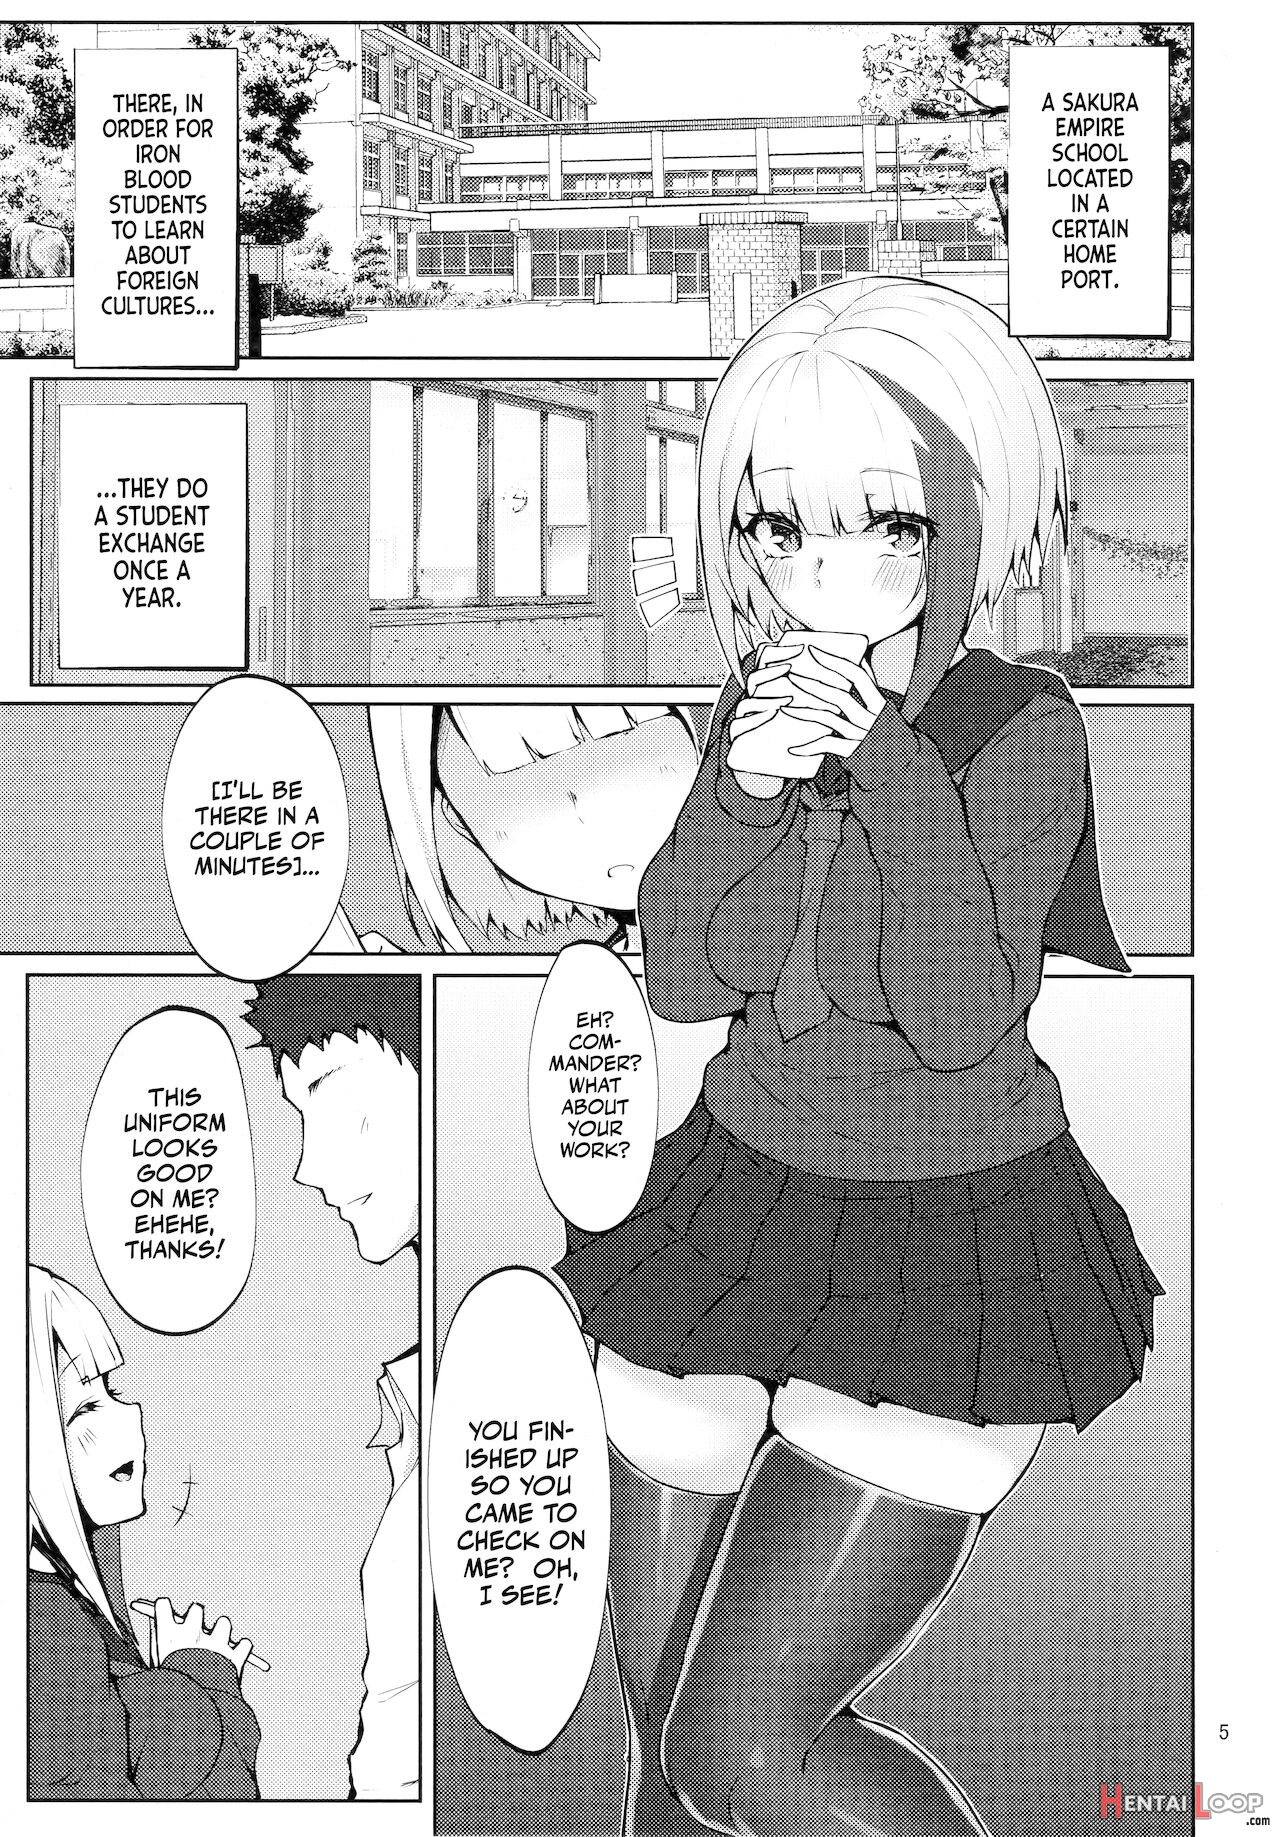 Does The Younger Sister Shipgirl Like Doing It In School Uniforms? page 3